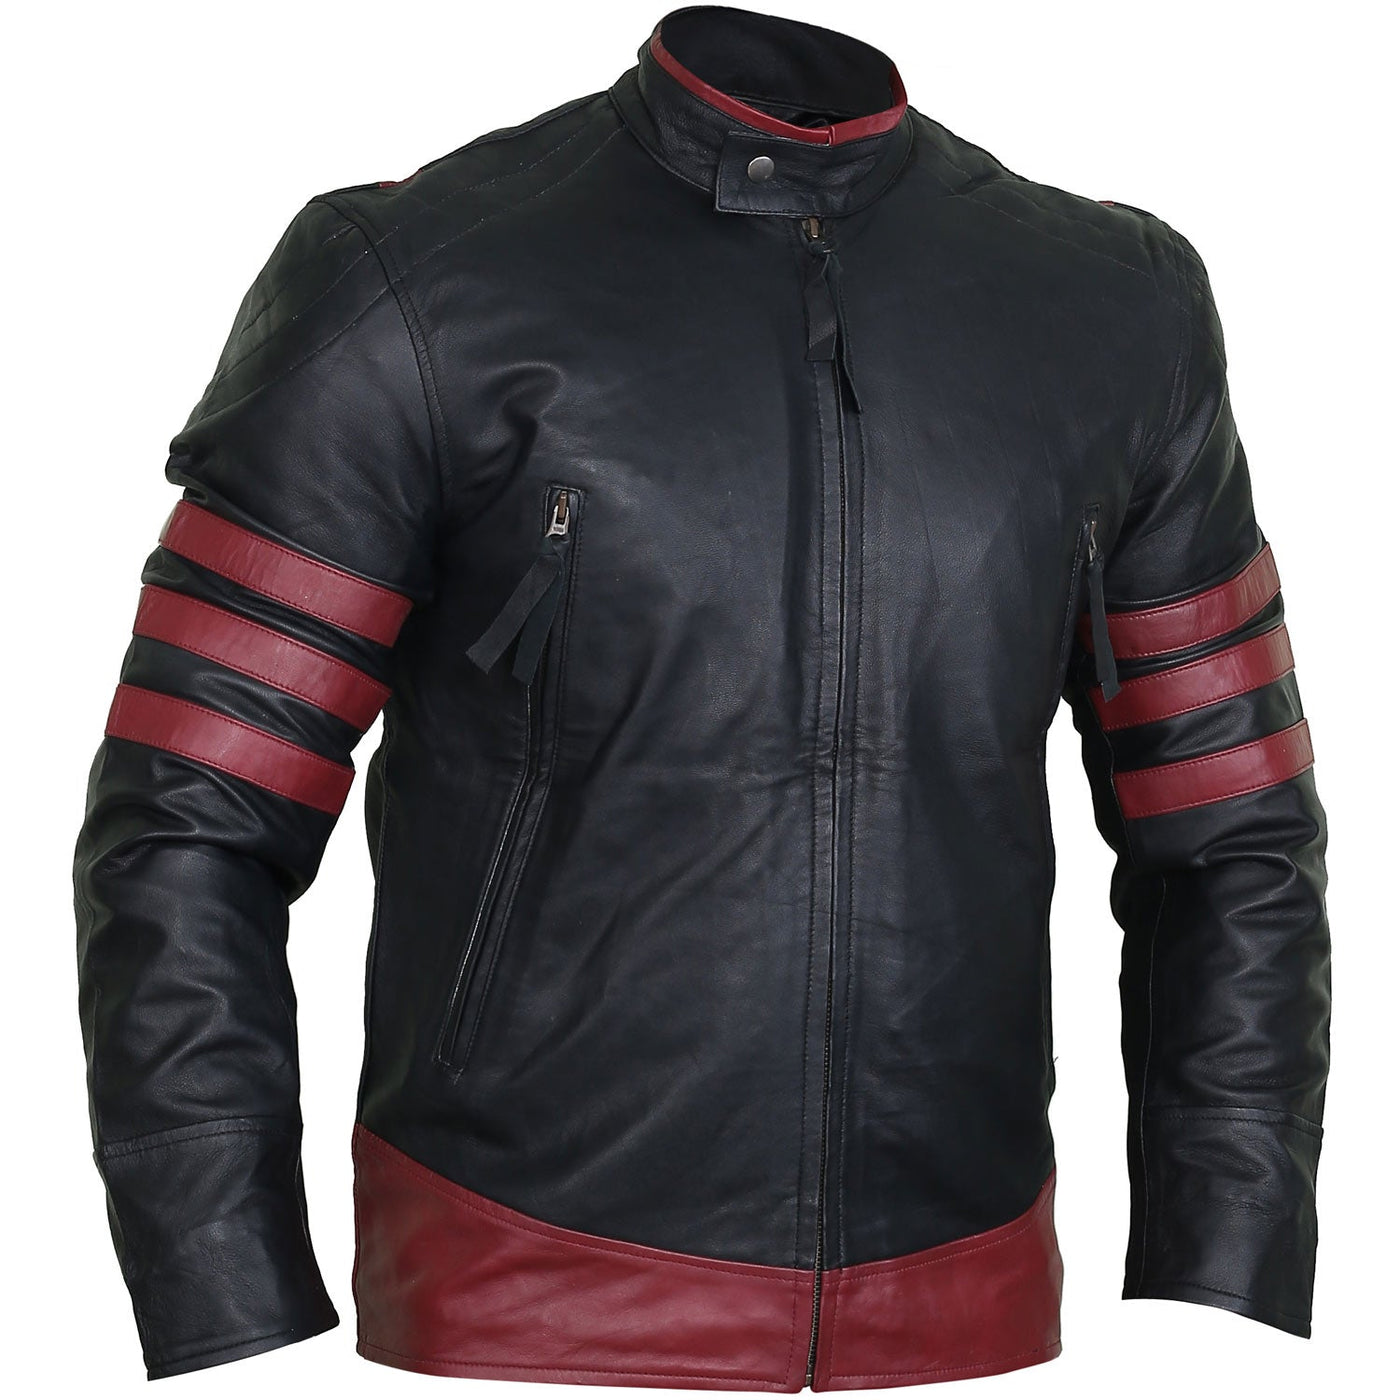 Henry Red and Black Leather Biker Jacket Right Side Pose